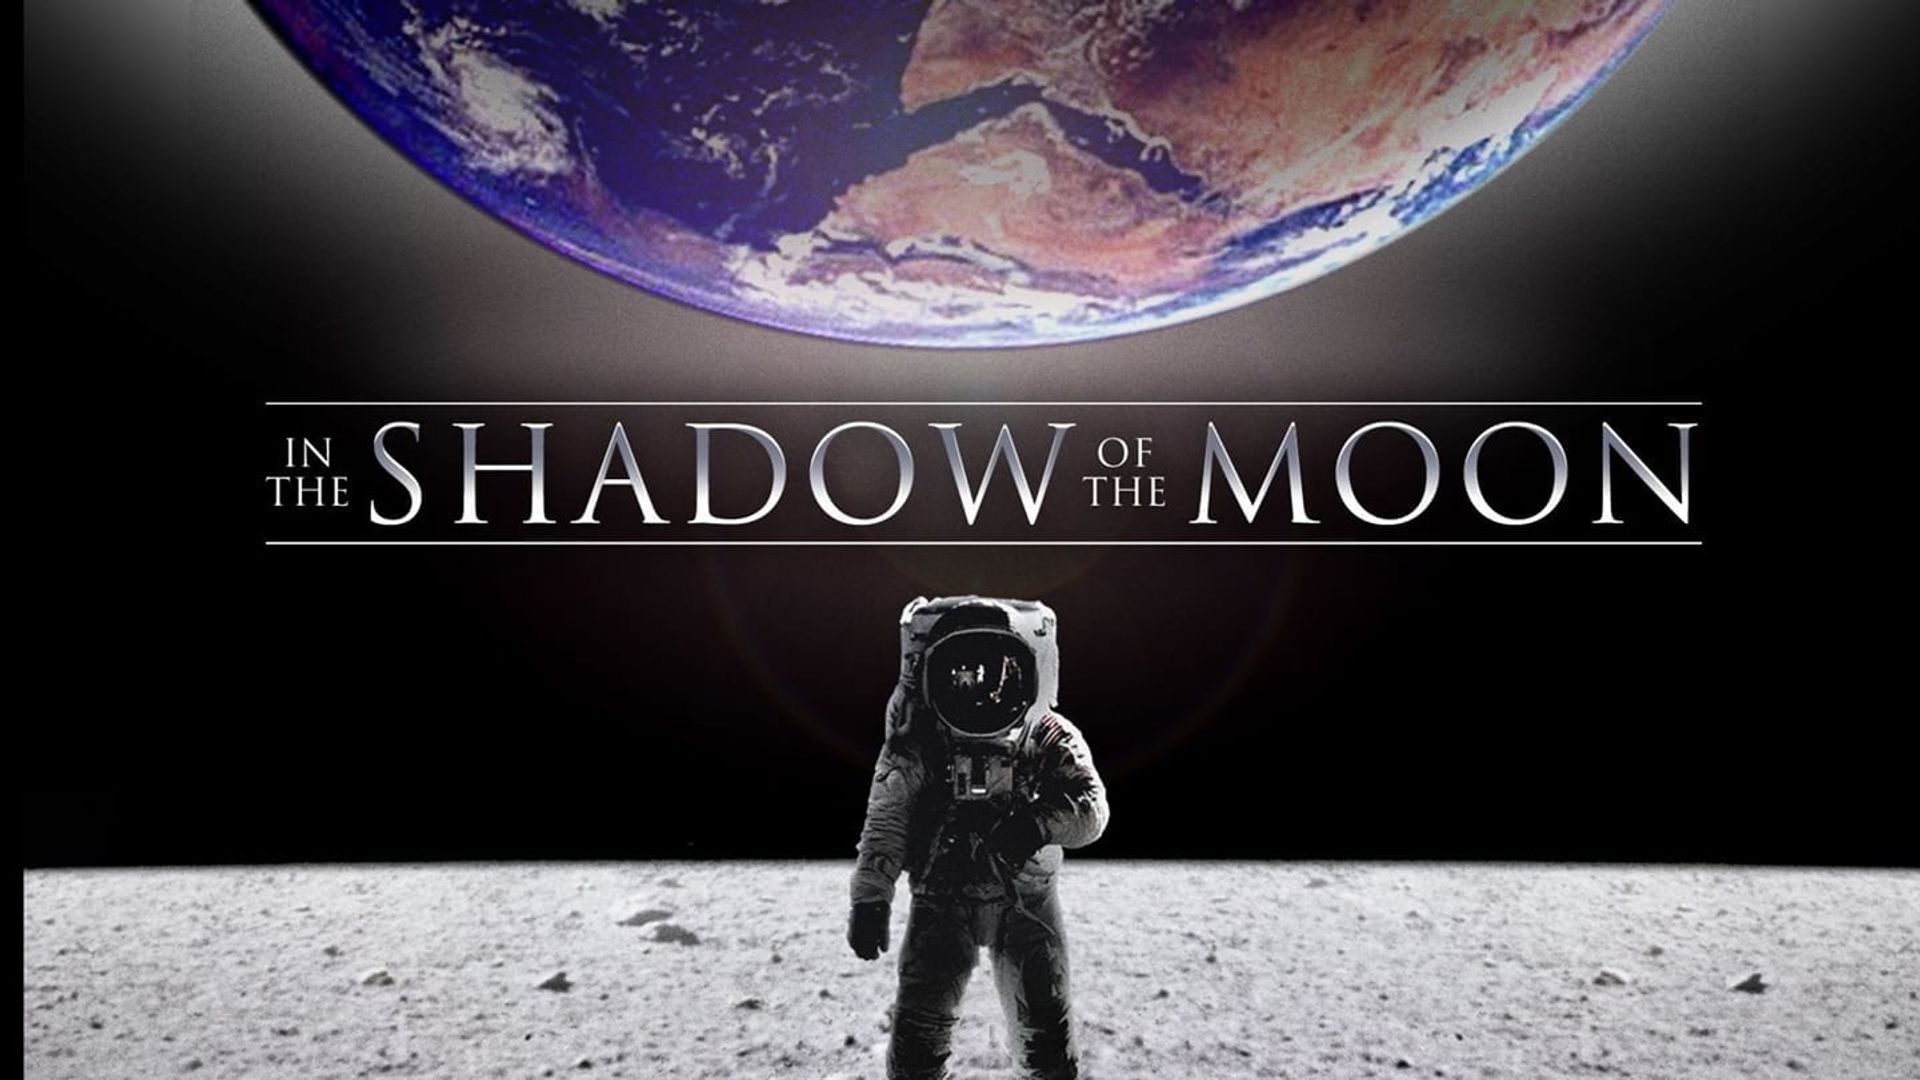 42-facts-about-the-movie-in-the-shadow-of-the-moon